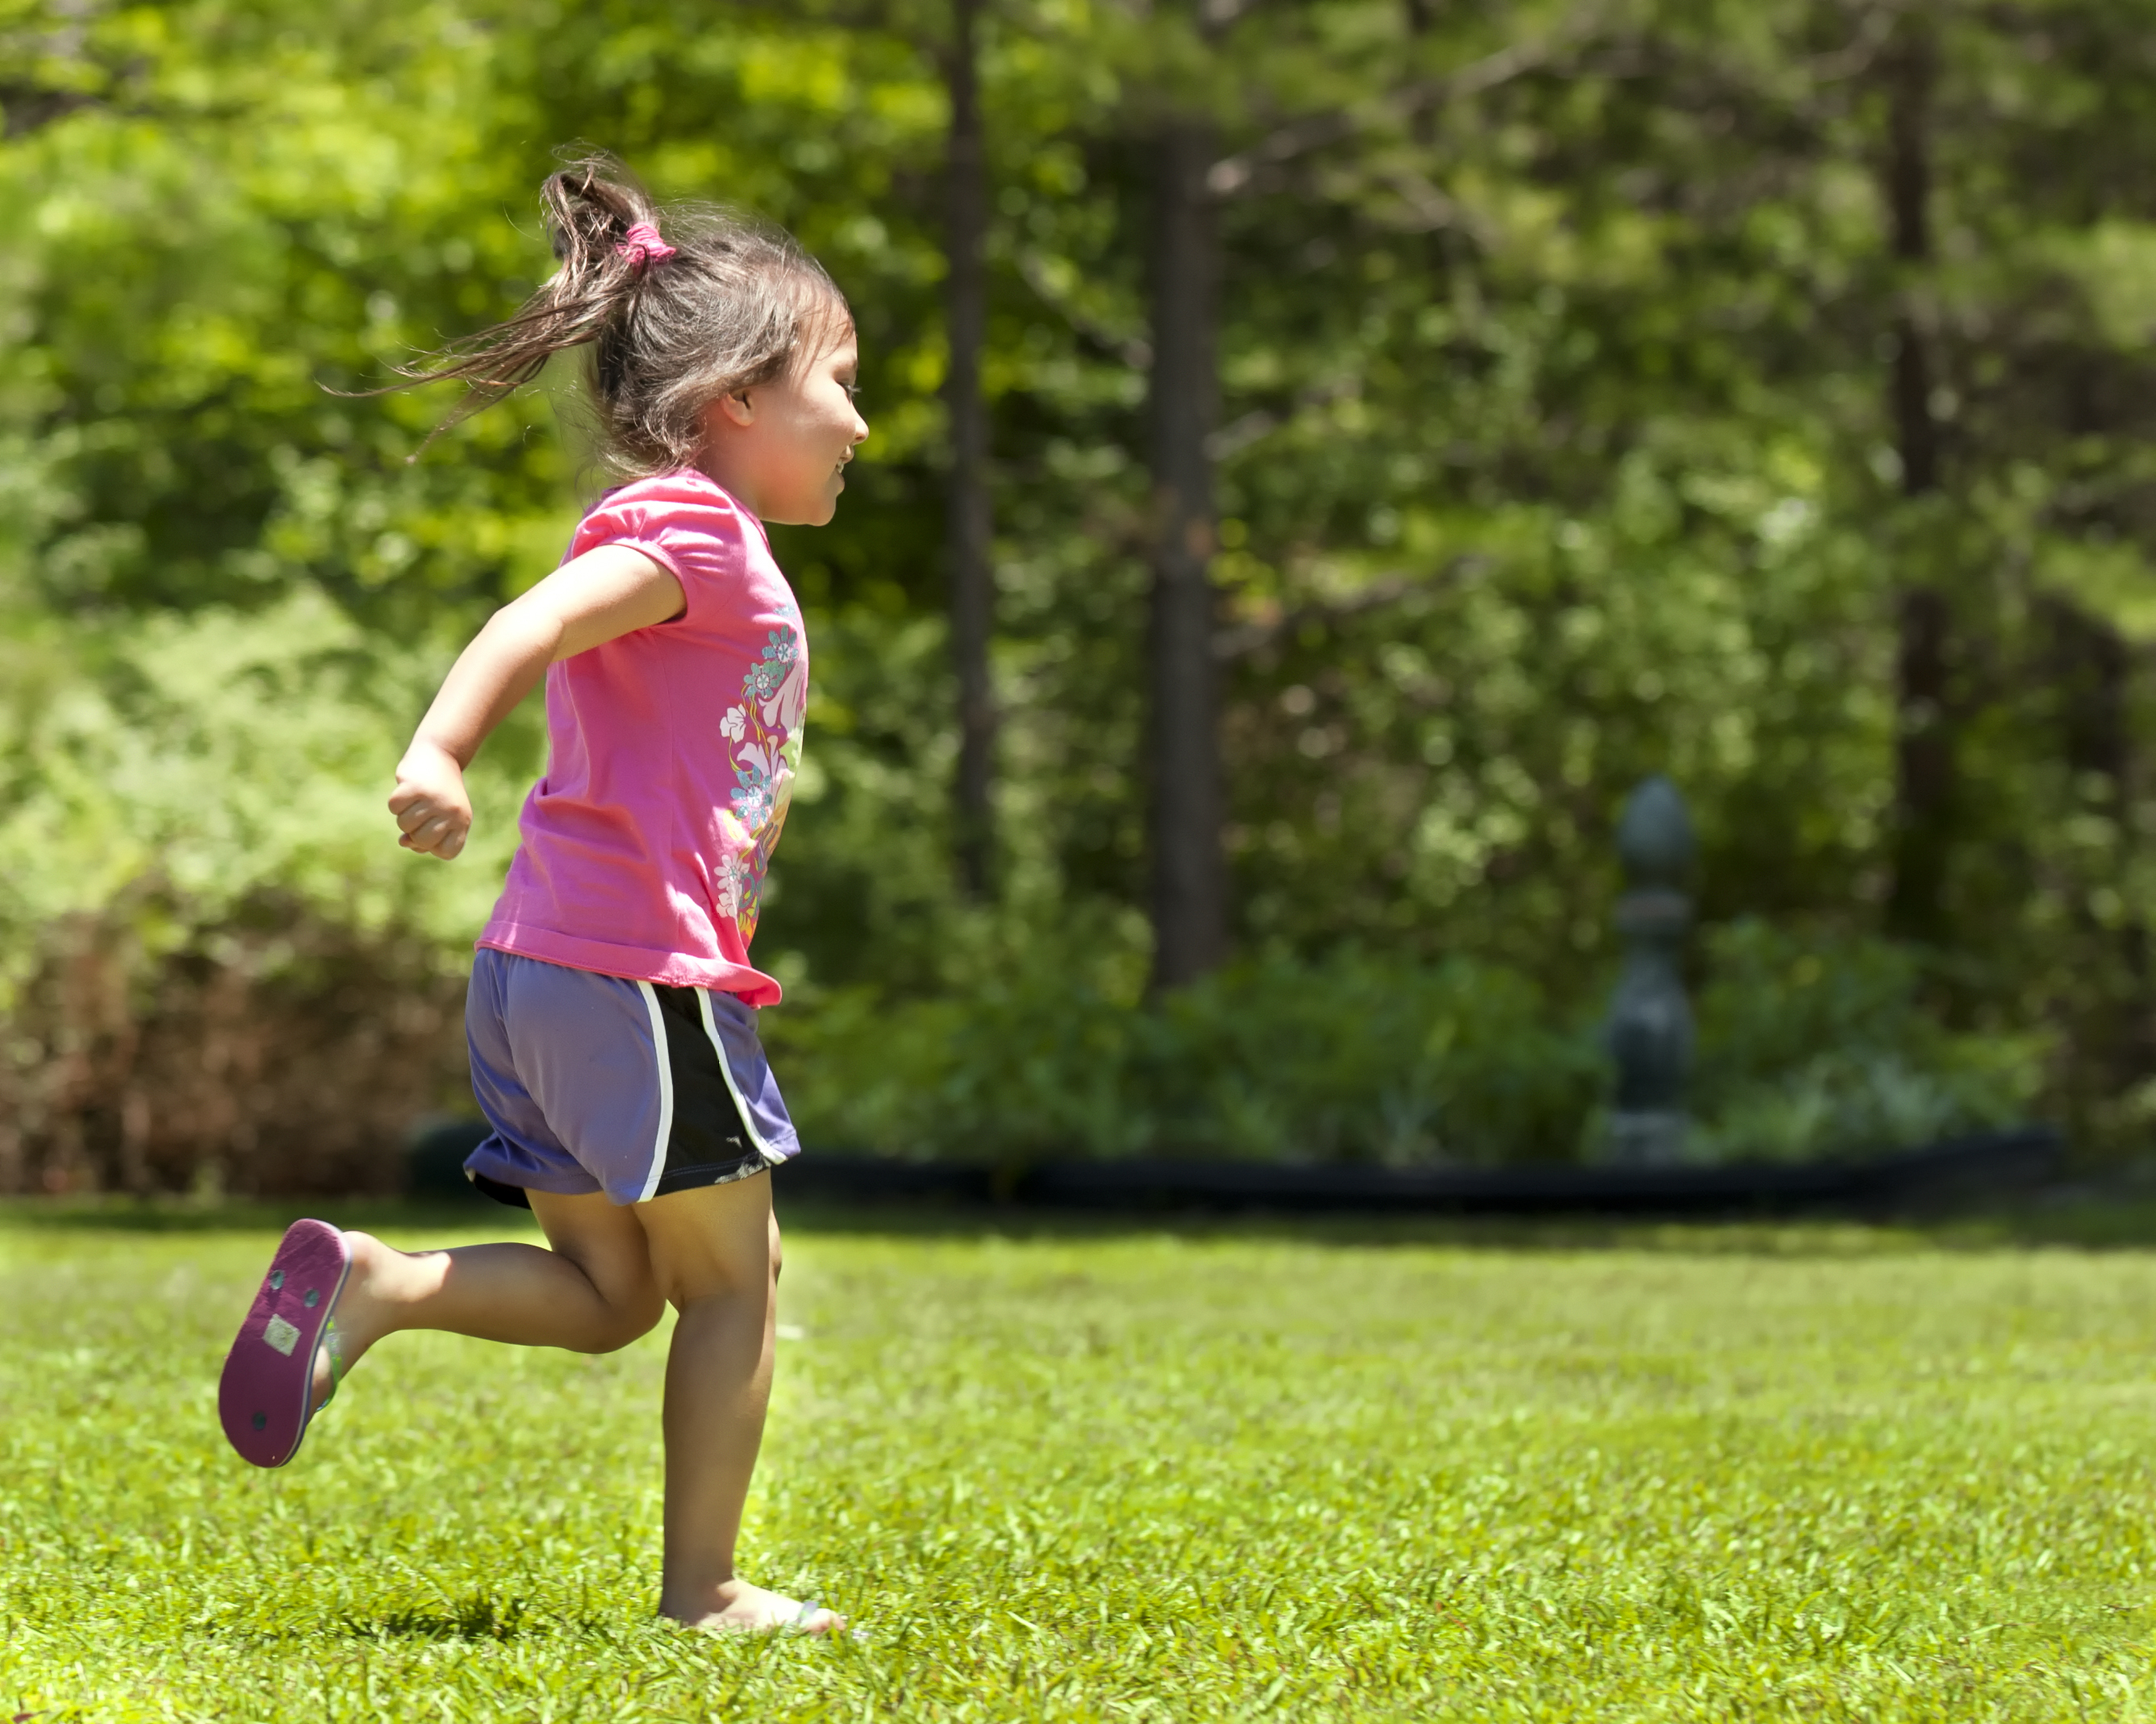 A young girl running in the park.